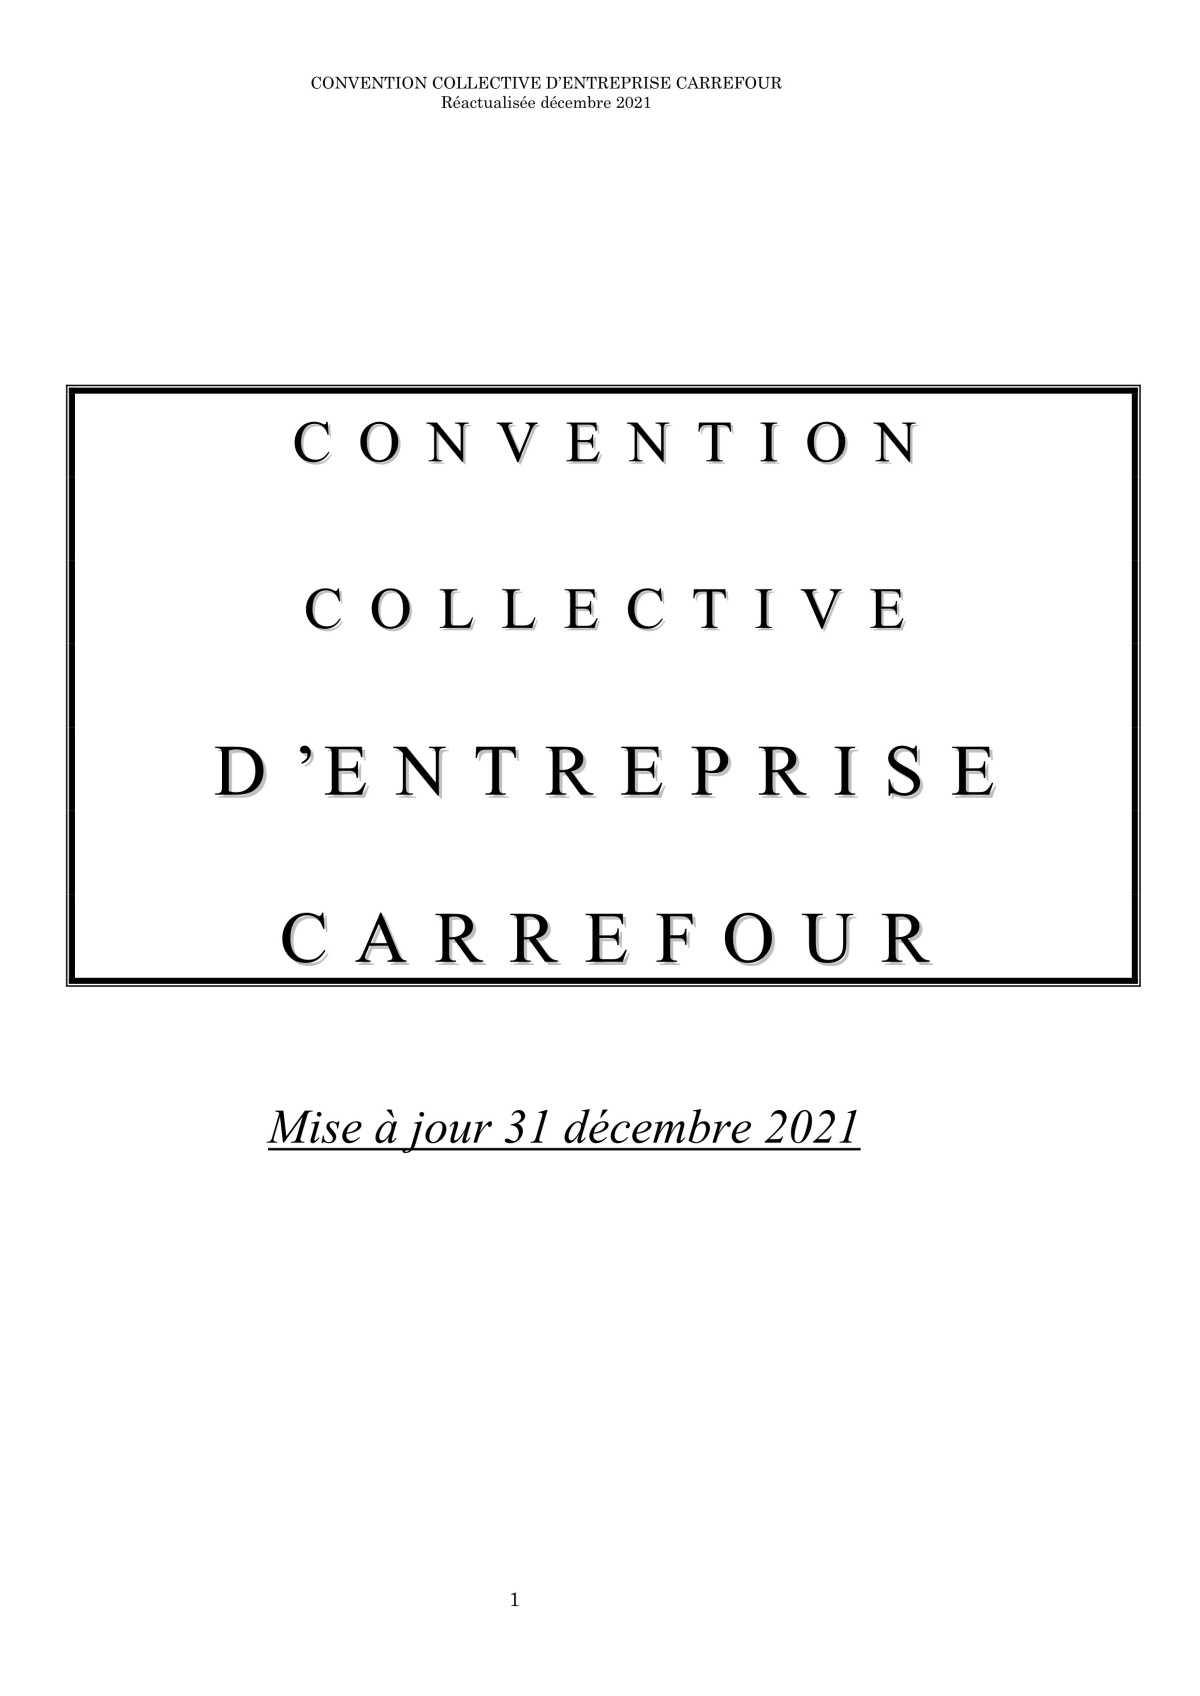 HYPERS - Convention collective d'entreprise (2021)